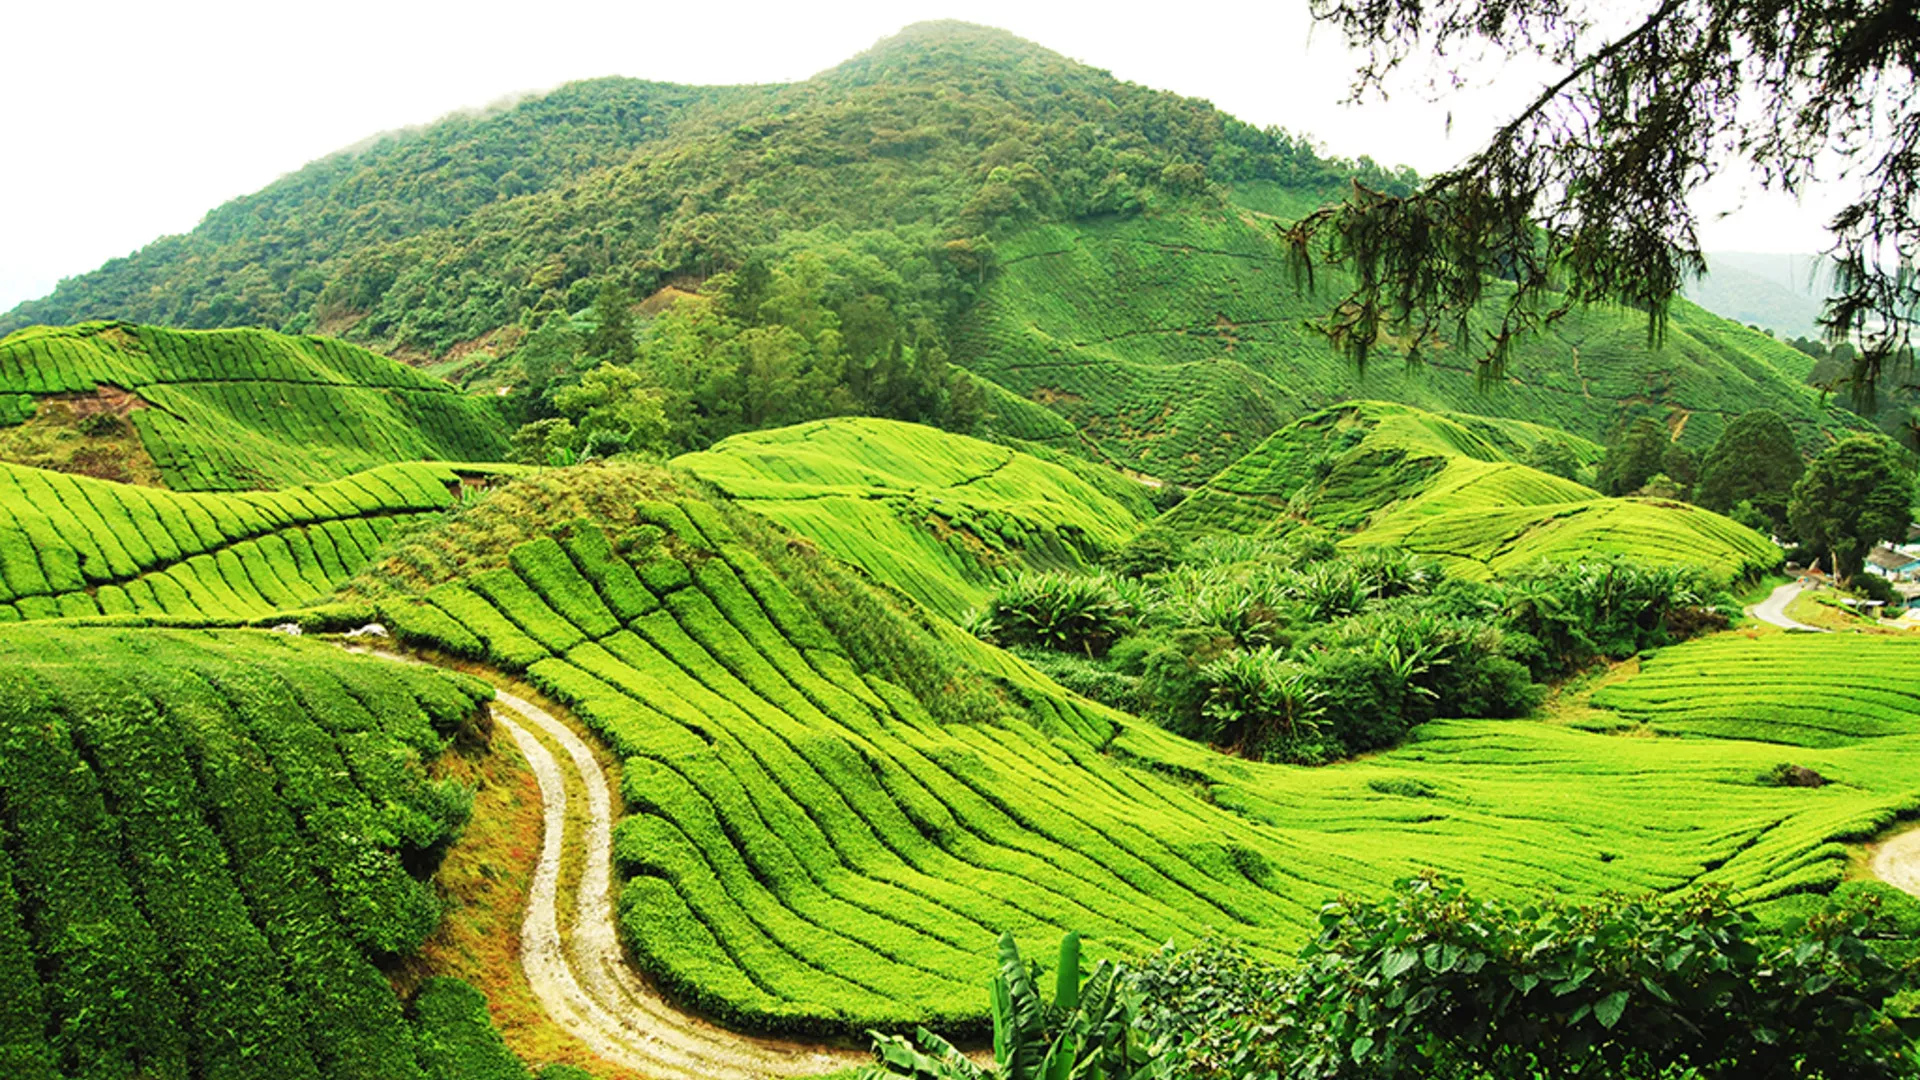 Cameron Highlands in Malaysia, East Asia | Trekking & Hiking - Rated 0.7